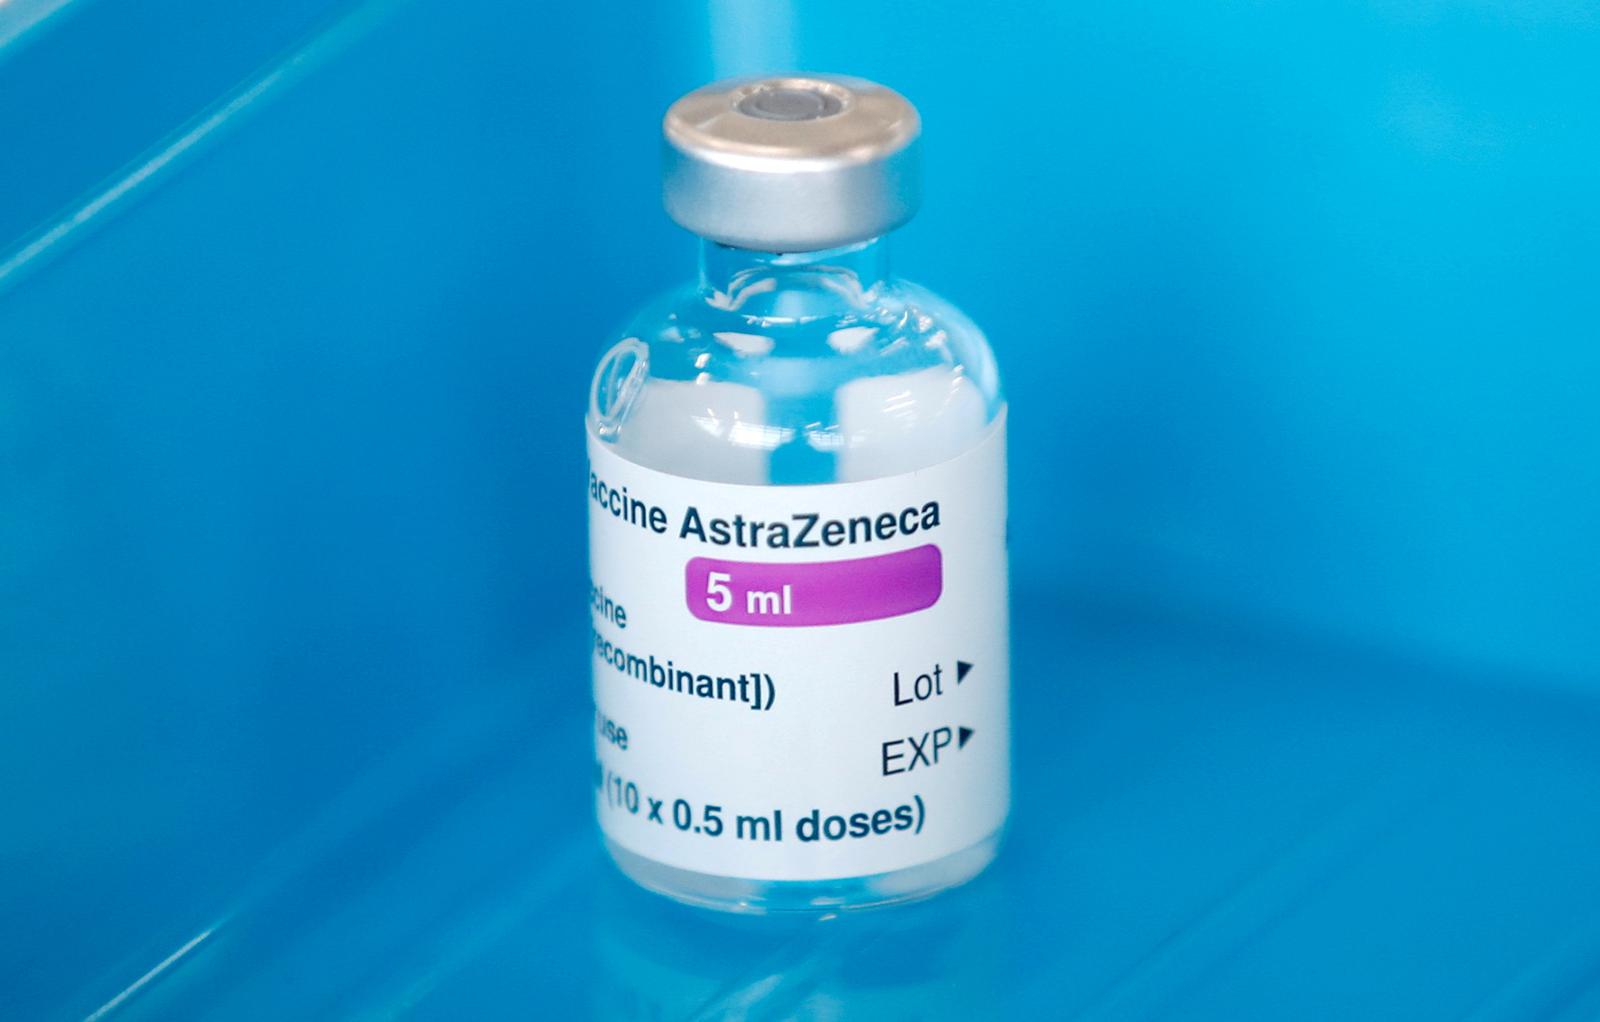 Thailand to administer AstraZeneca vaccine after delay over safety